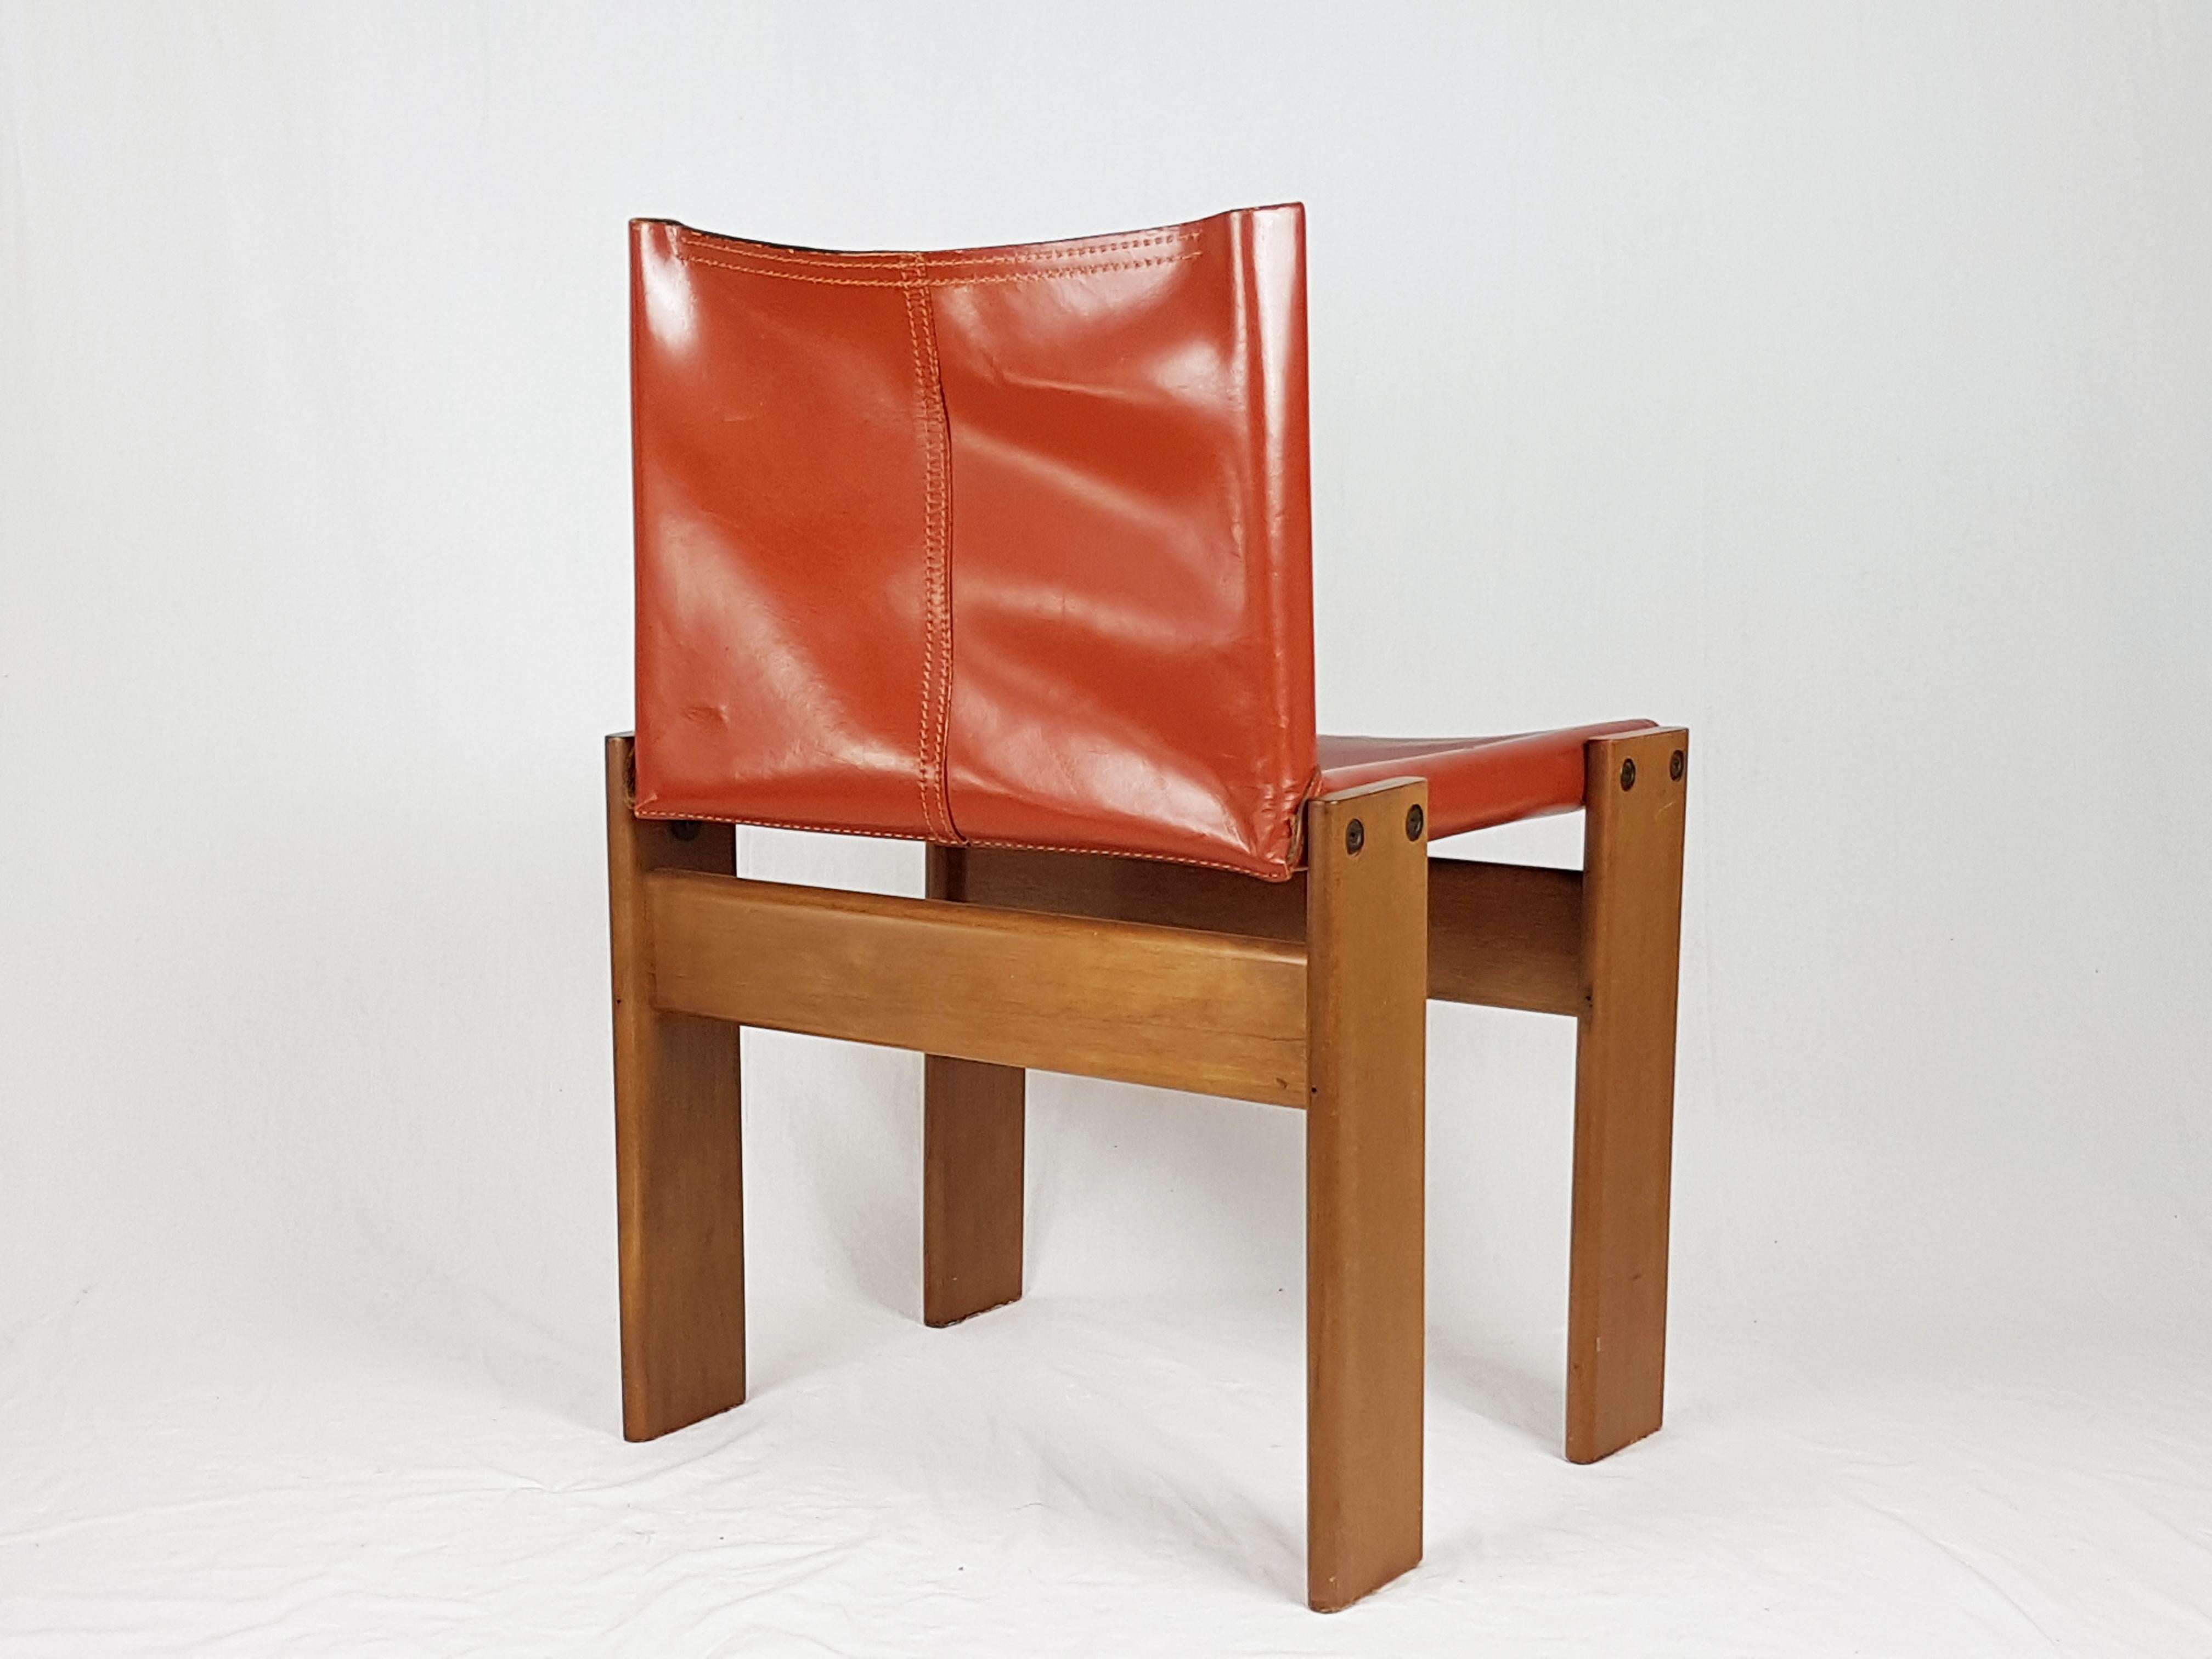 Walnut structure with brick red seat and backrest. Overall very good condition: normal signs of wear due to use and time. Only one of the 4 wooden legs has visible defects.